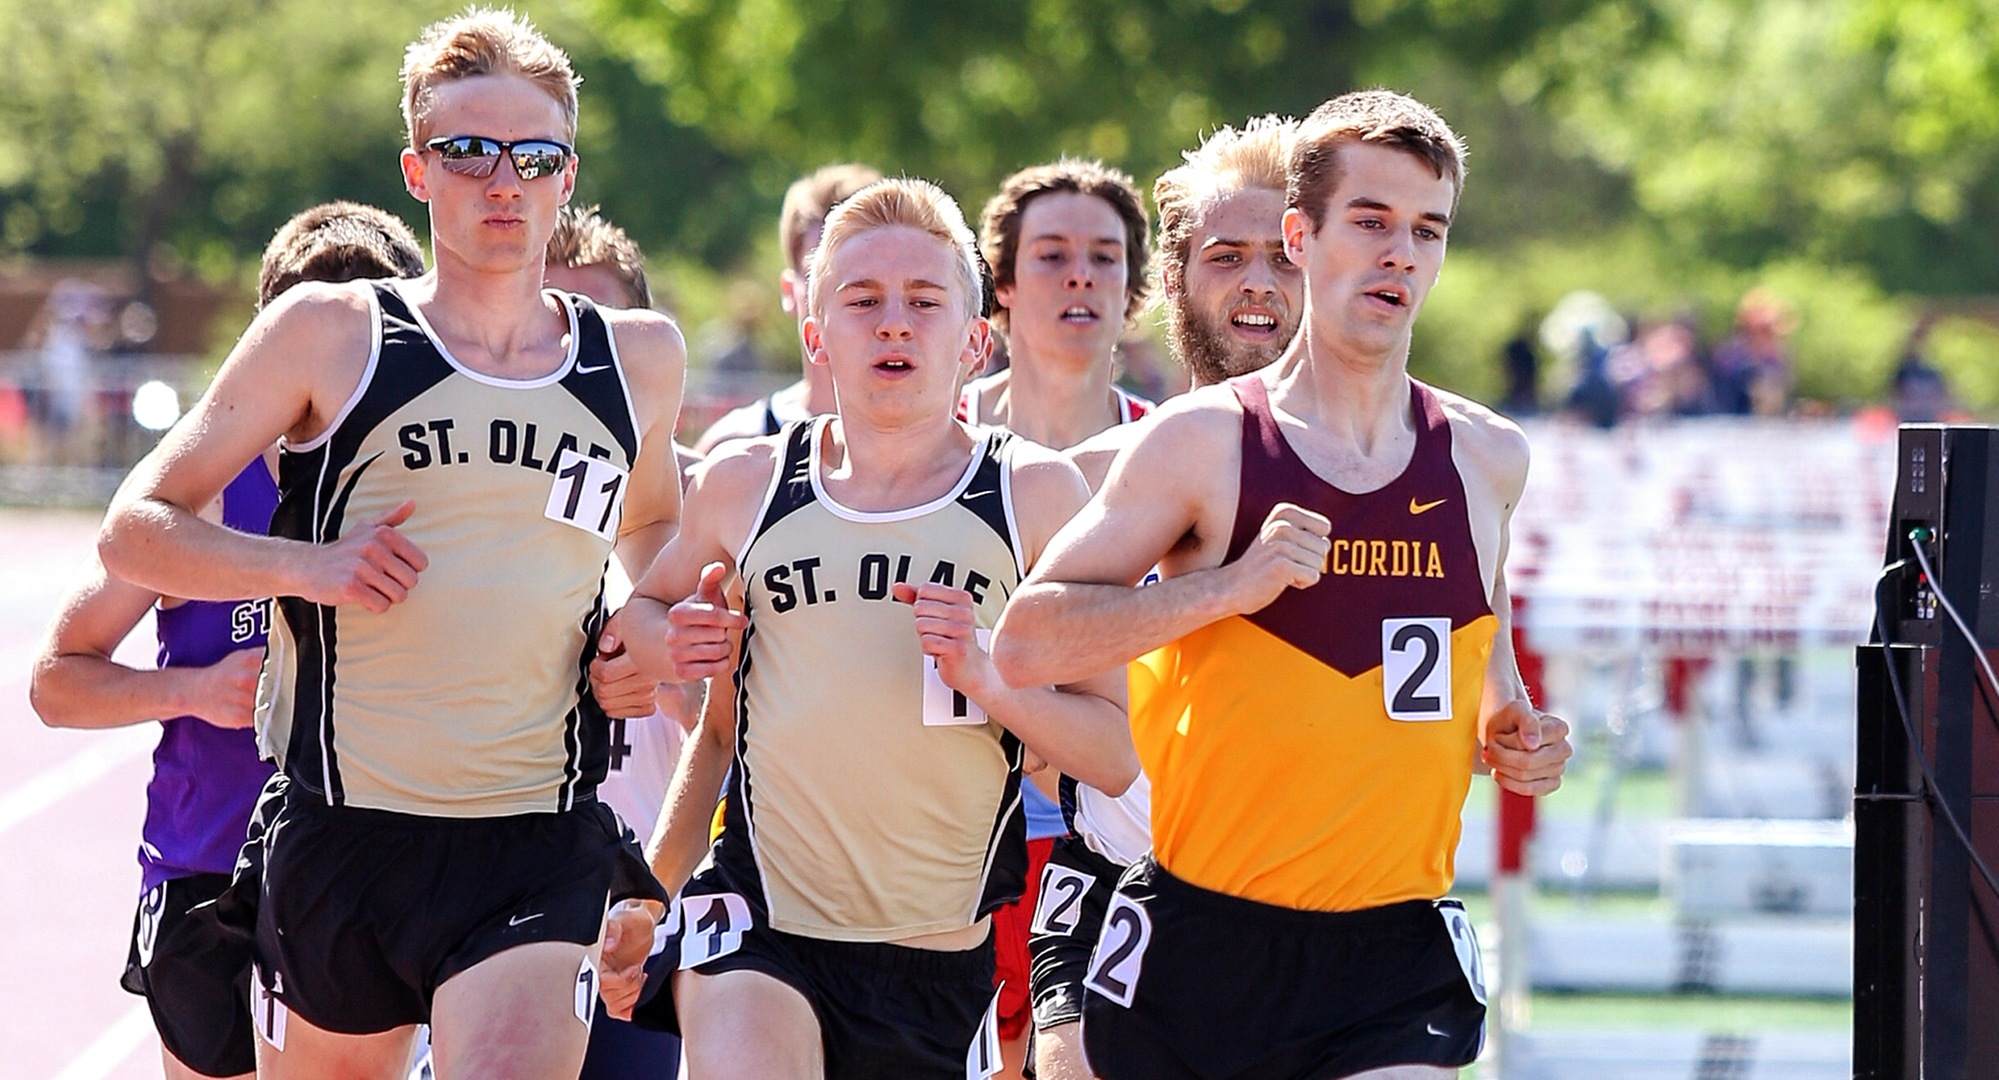 Senior Matthew Lillehaugen capped his MIAC career by finishing fourth in the 1500 meters with the seventhy fastest time in school history. (Photo courtesy of Nathan Lodermeier.